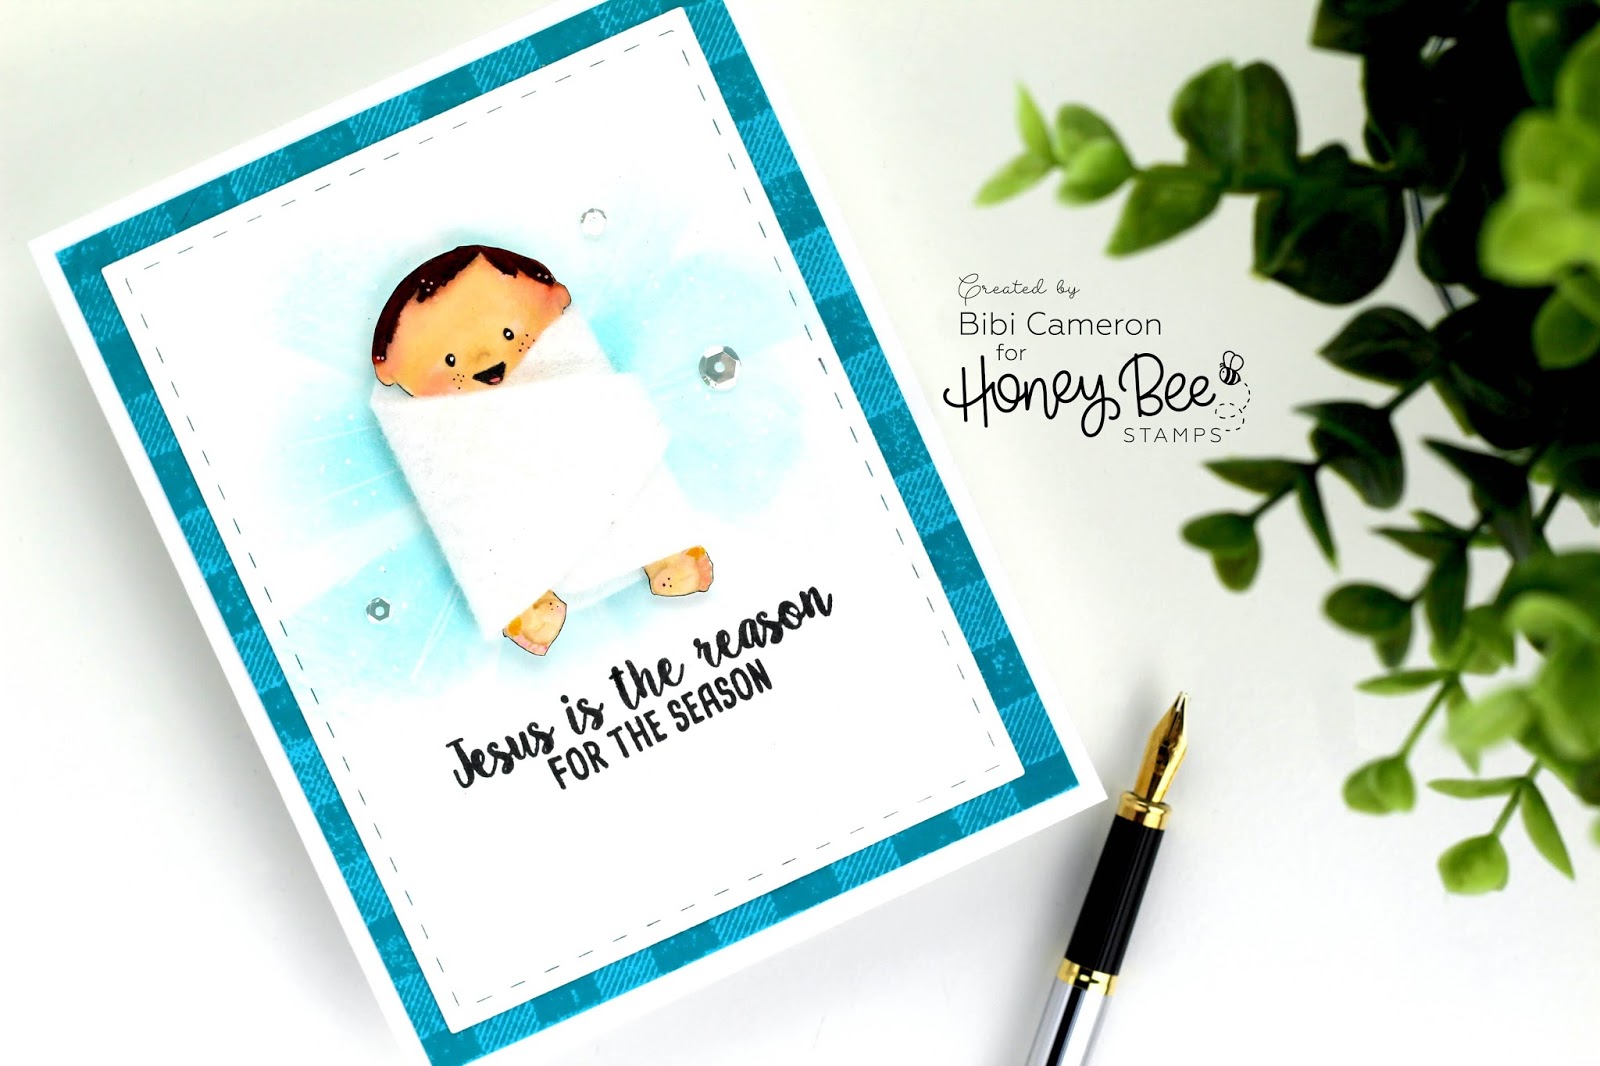 Baby Jesus Christmas Card  with  Honey Bee Stamps